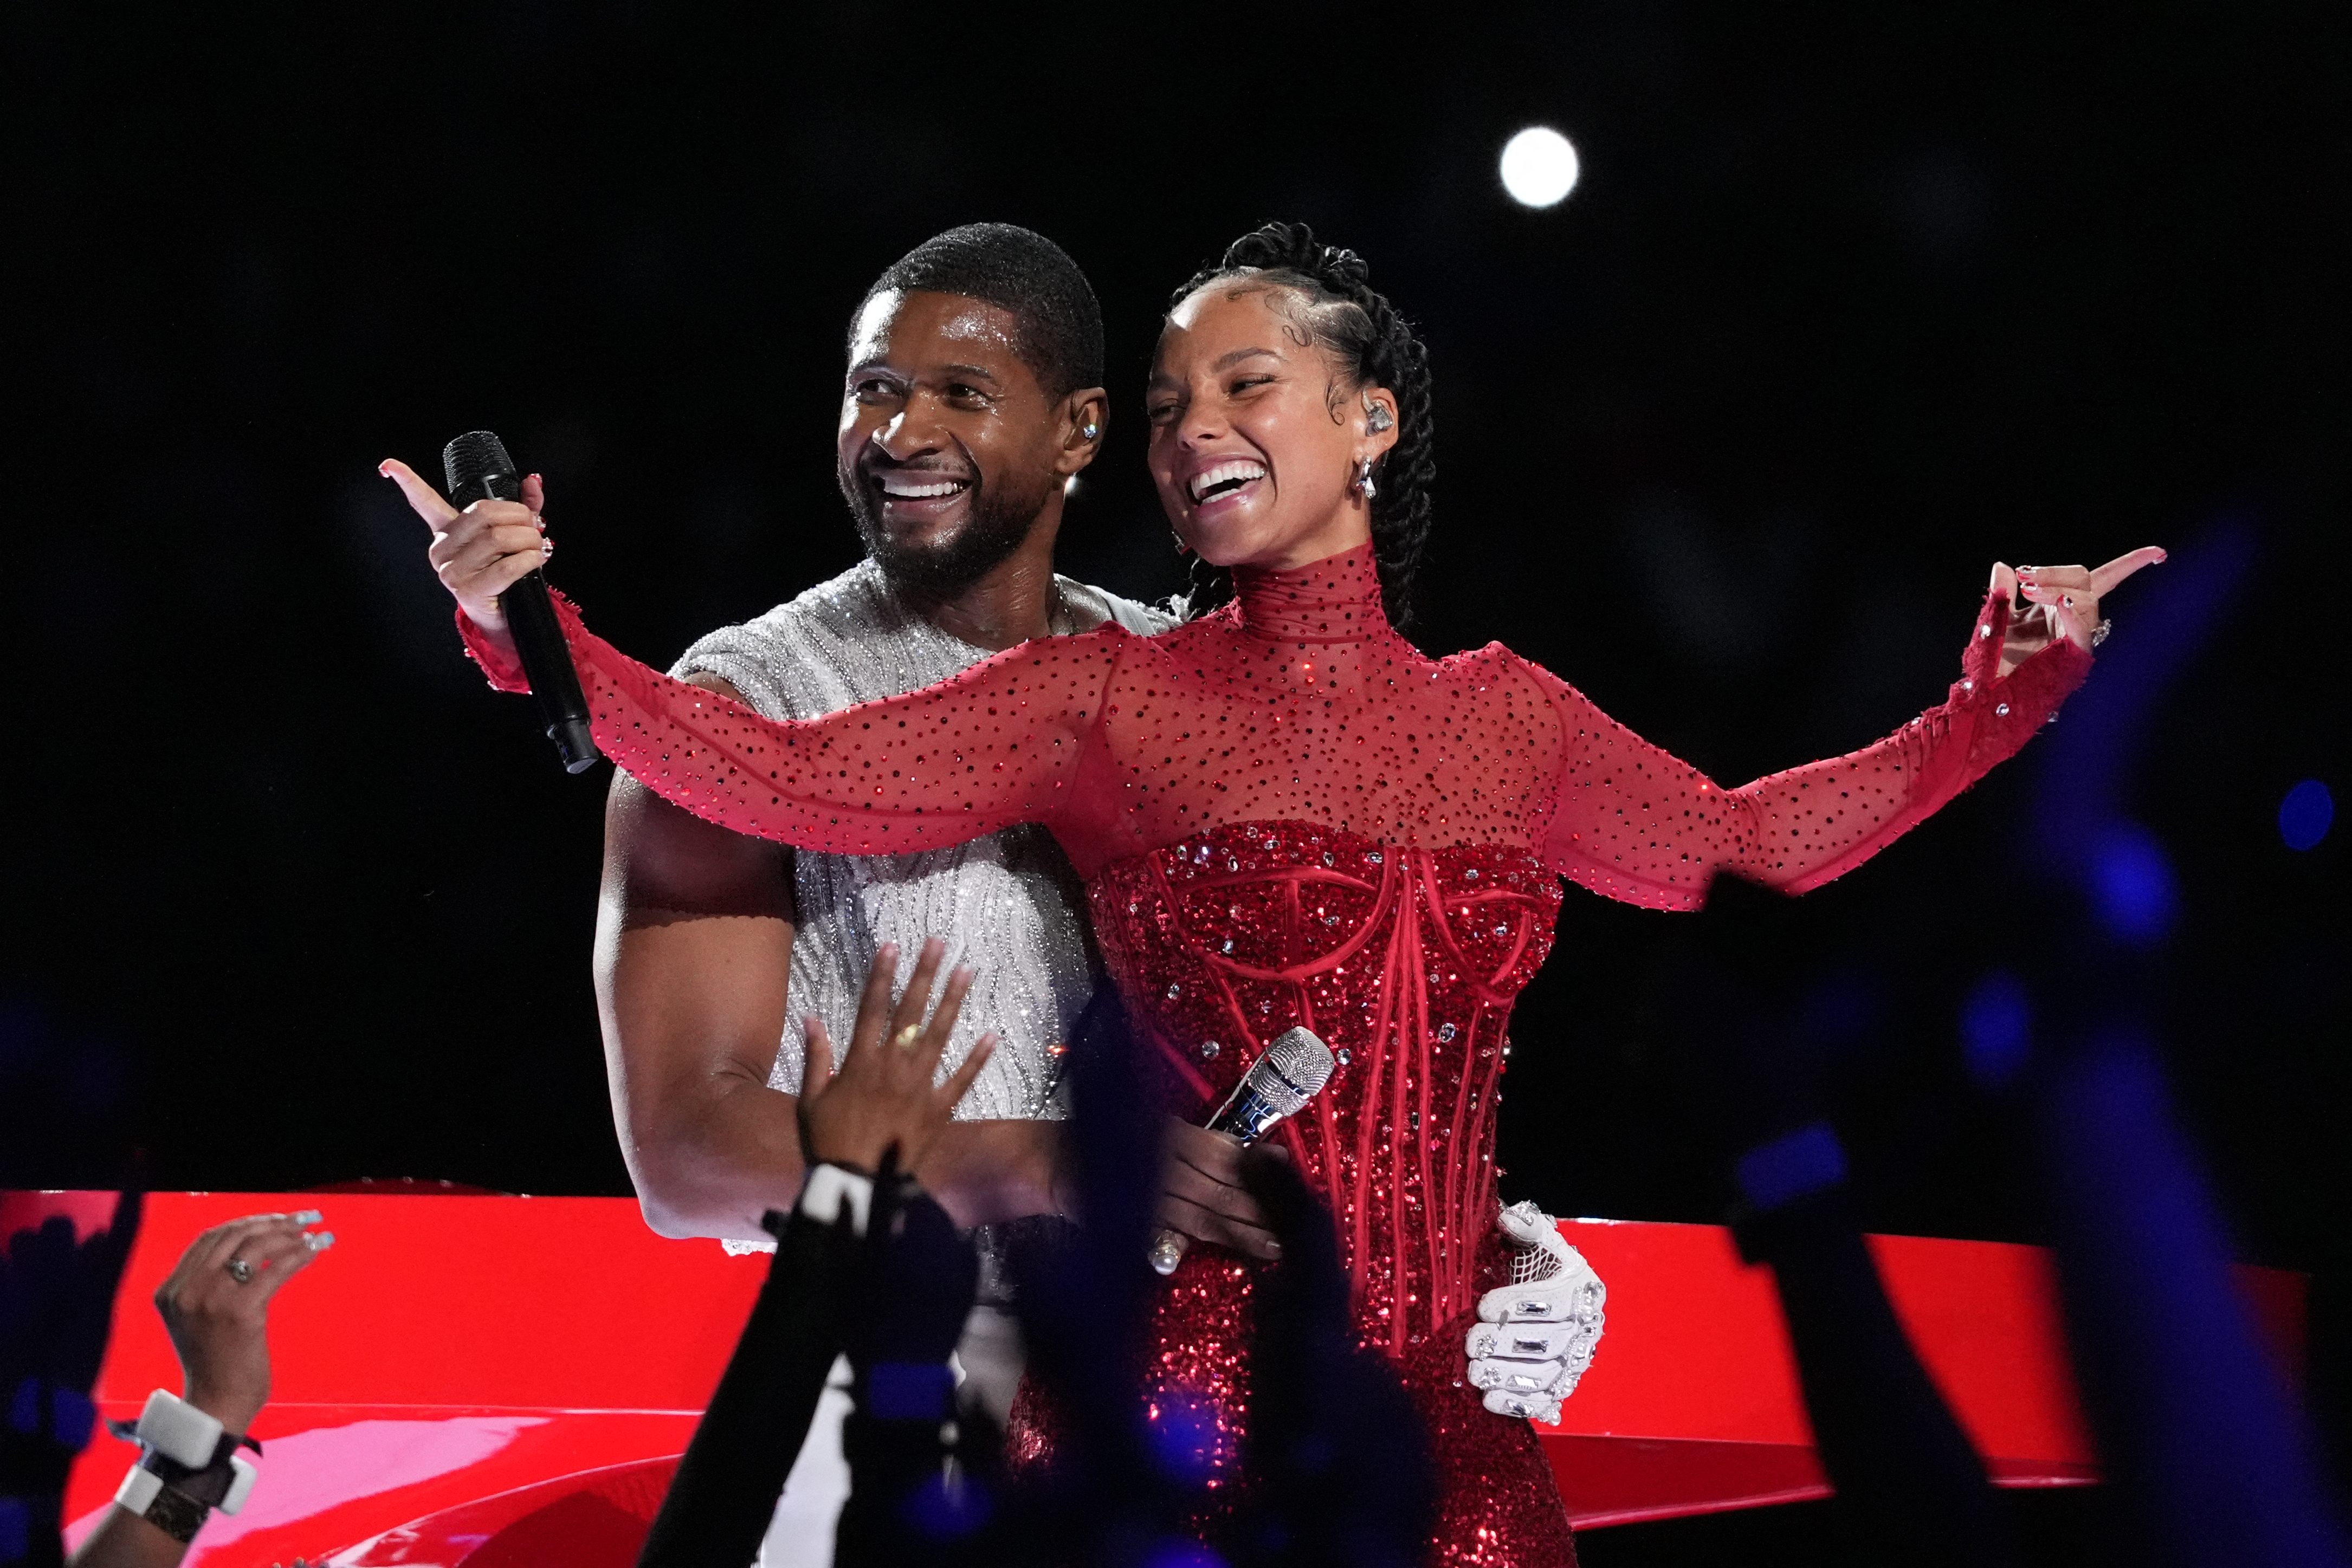 Despite the technicalities, Usher had a great performance with Alicia Keys and Ludacris